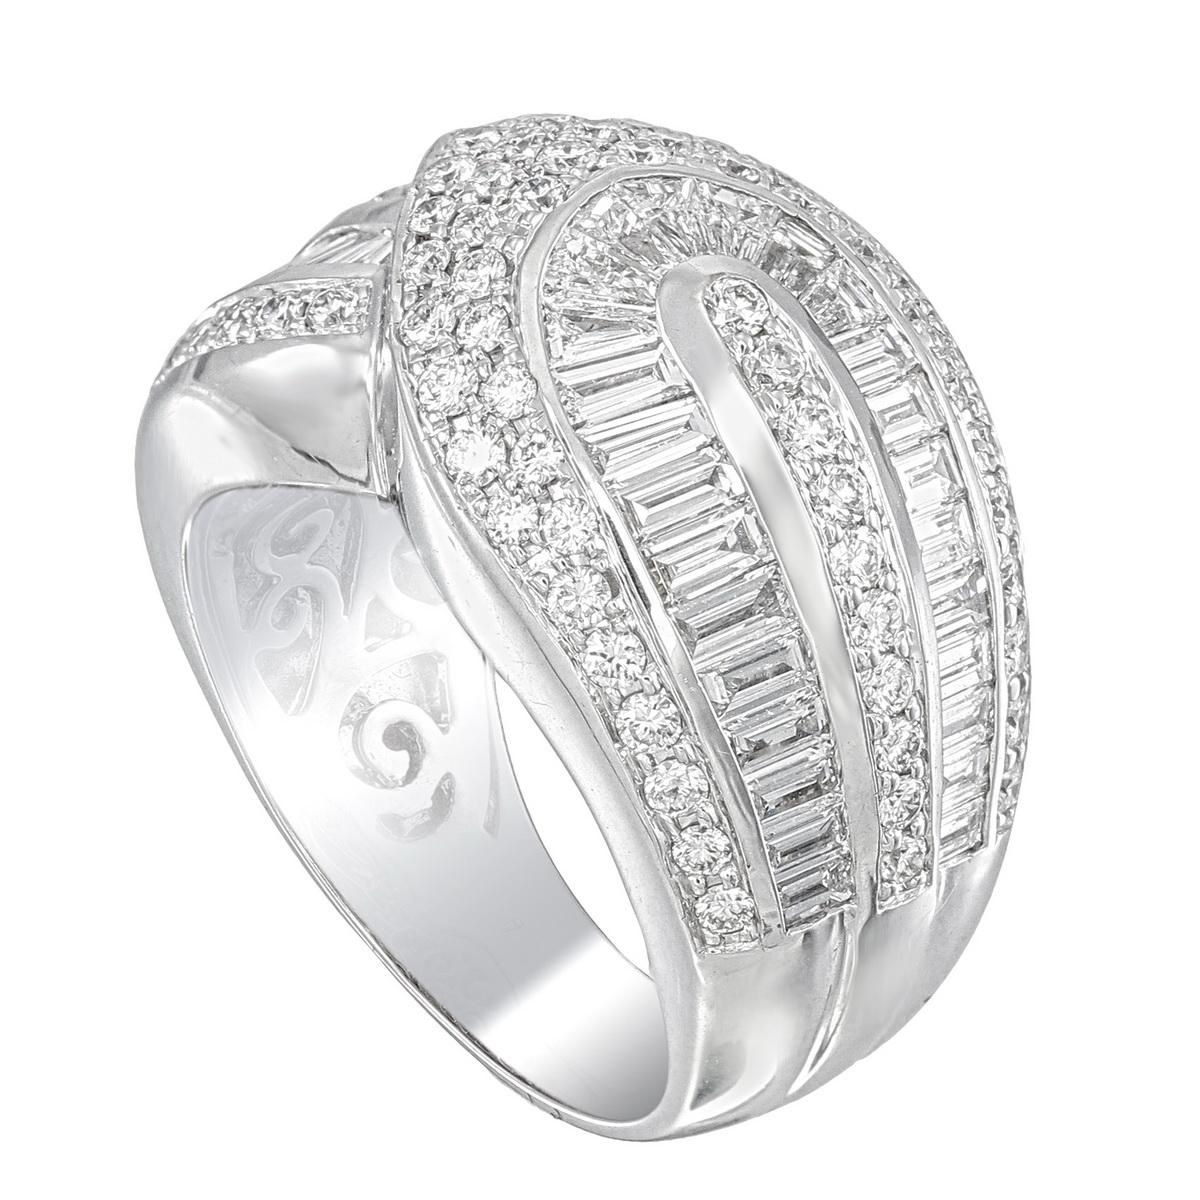 A new diamond wedding ring. 1.02 carats of diamond round and 1.52 carats of diamond tapper encompass this ring. This ring features a bold and contemporary style that makes it stand out. The total weight of this ring is 14.74 grams.

Allure Jewellery